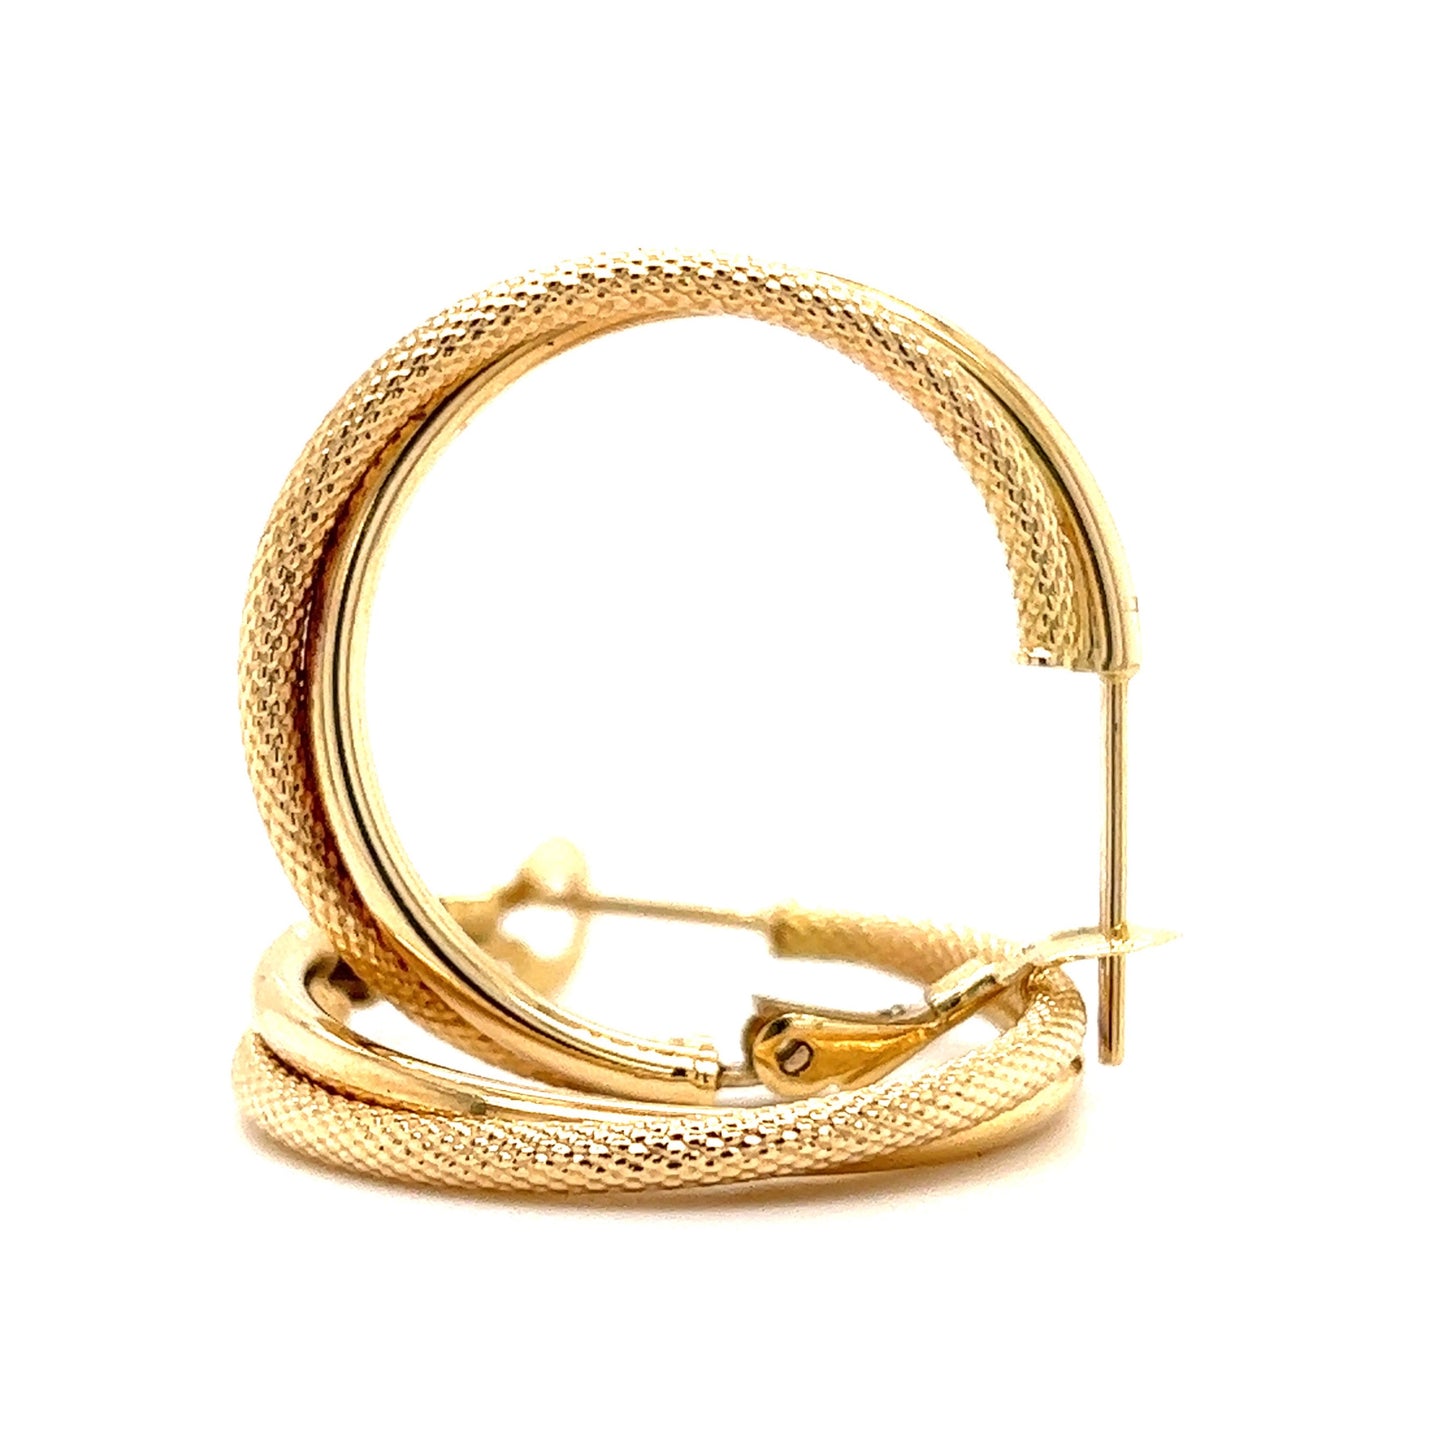 Double Hoop Earrings in 14K Yellow Gold Additional View